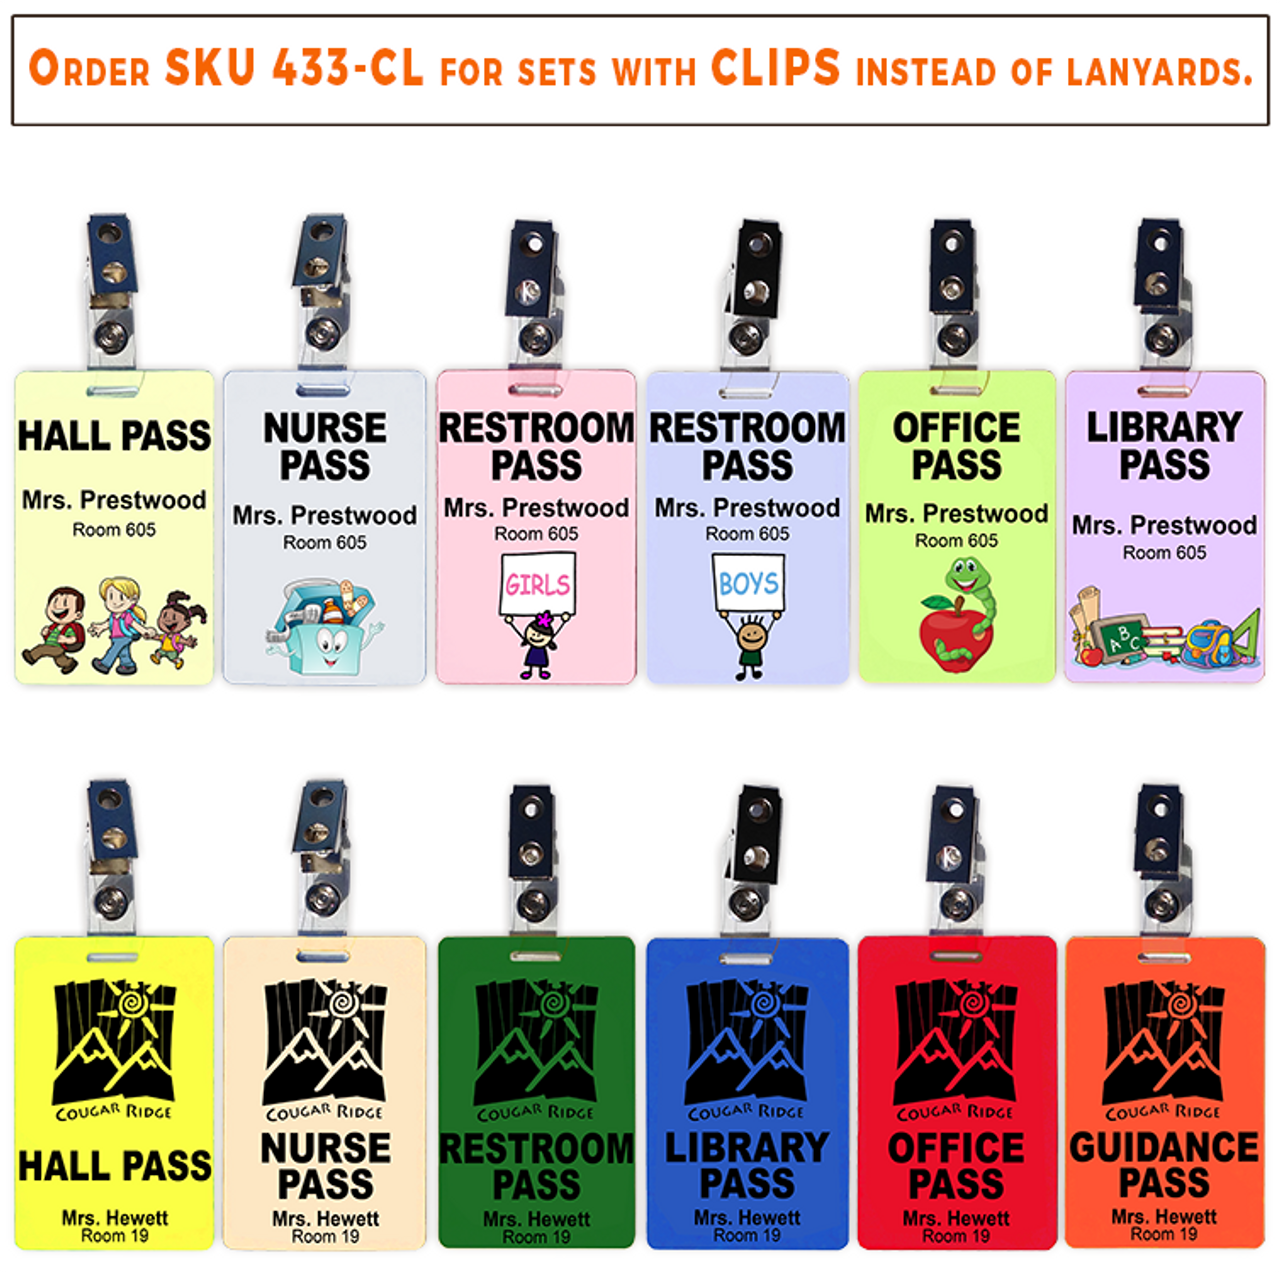 Order 433-CL for Clips instead of lanyards.